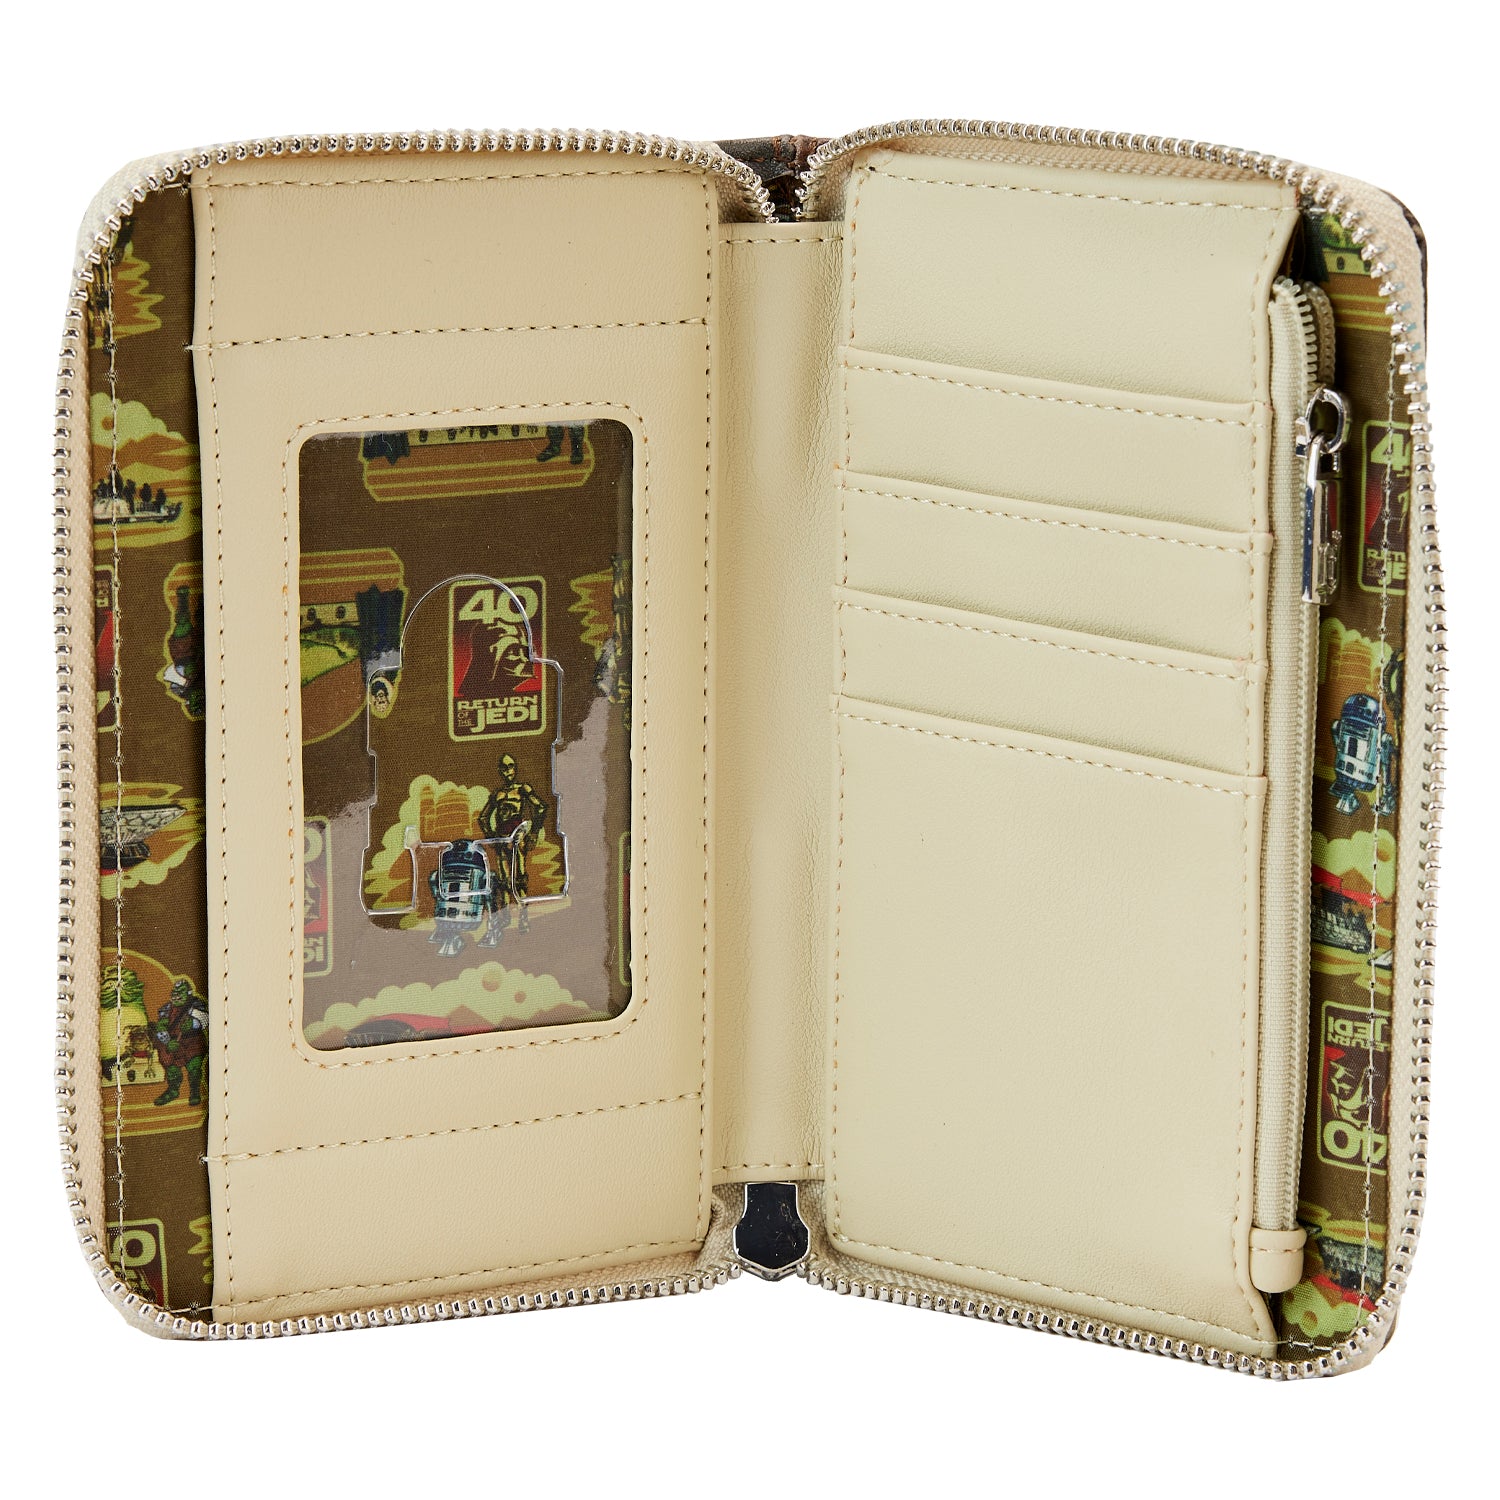 Loungefly x Star Wars Return of the Jedi 40th Anniversary Jabba's Palace Wallet